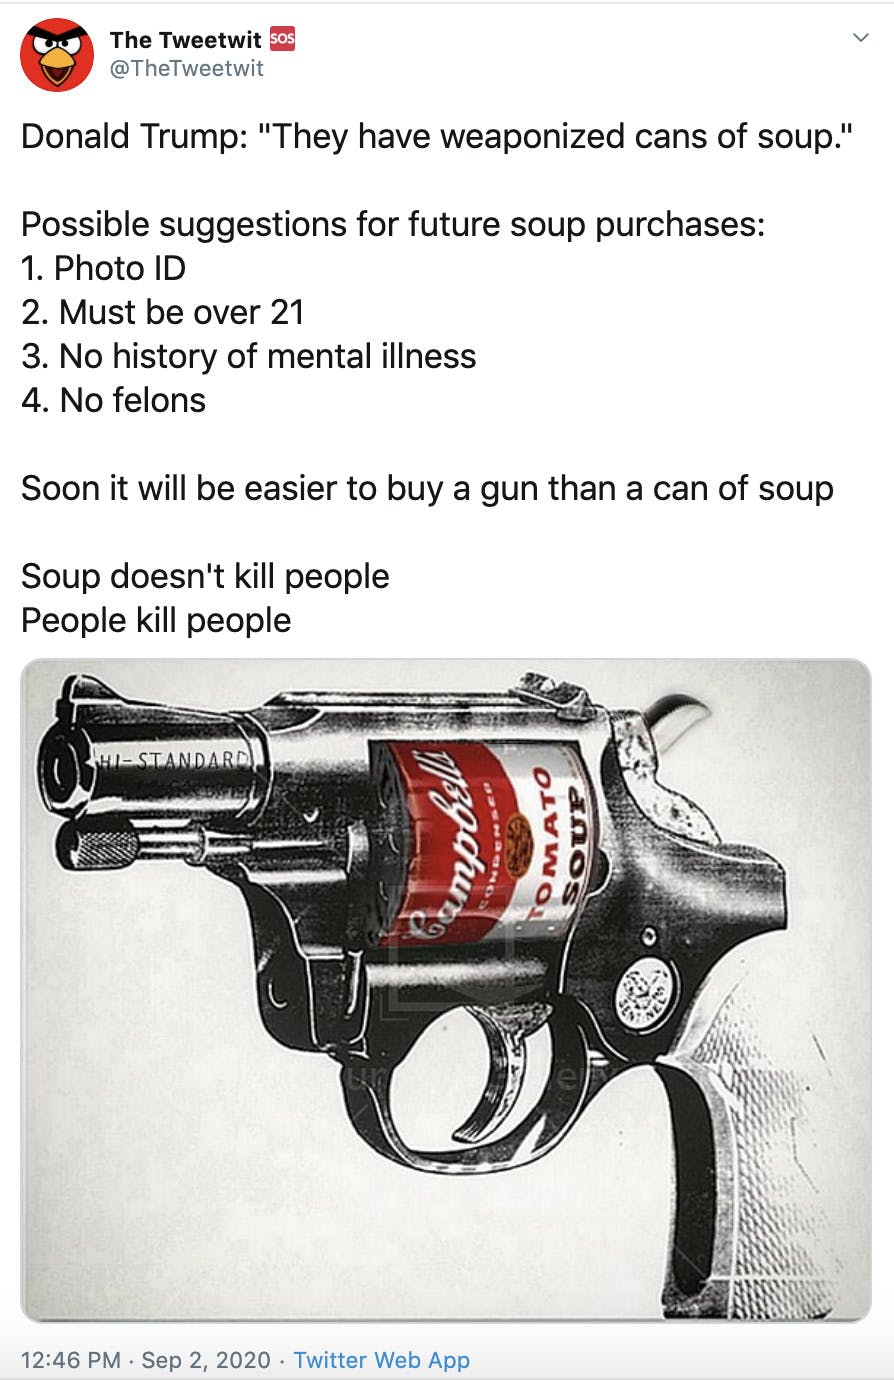 "Donald Trump: "They have weaponized cans of soup."  Possible suggestions for future soup purchases: 1. Photo ID 2. Must be over 21 3. No history of mental illness 4. No felons  Soon it will be easier to buy a gun than a can of soup  Soup doesn't kill people People kill people" drawing of a revolver loaded with a tin of Campbells soup